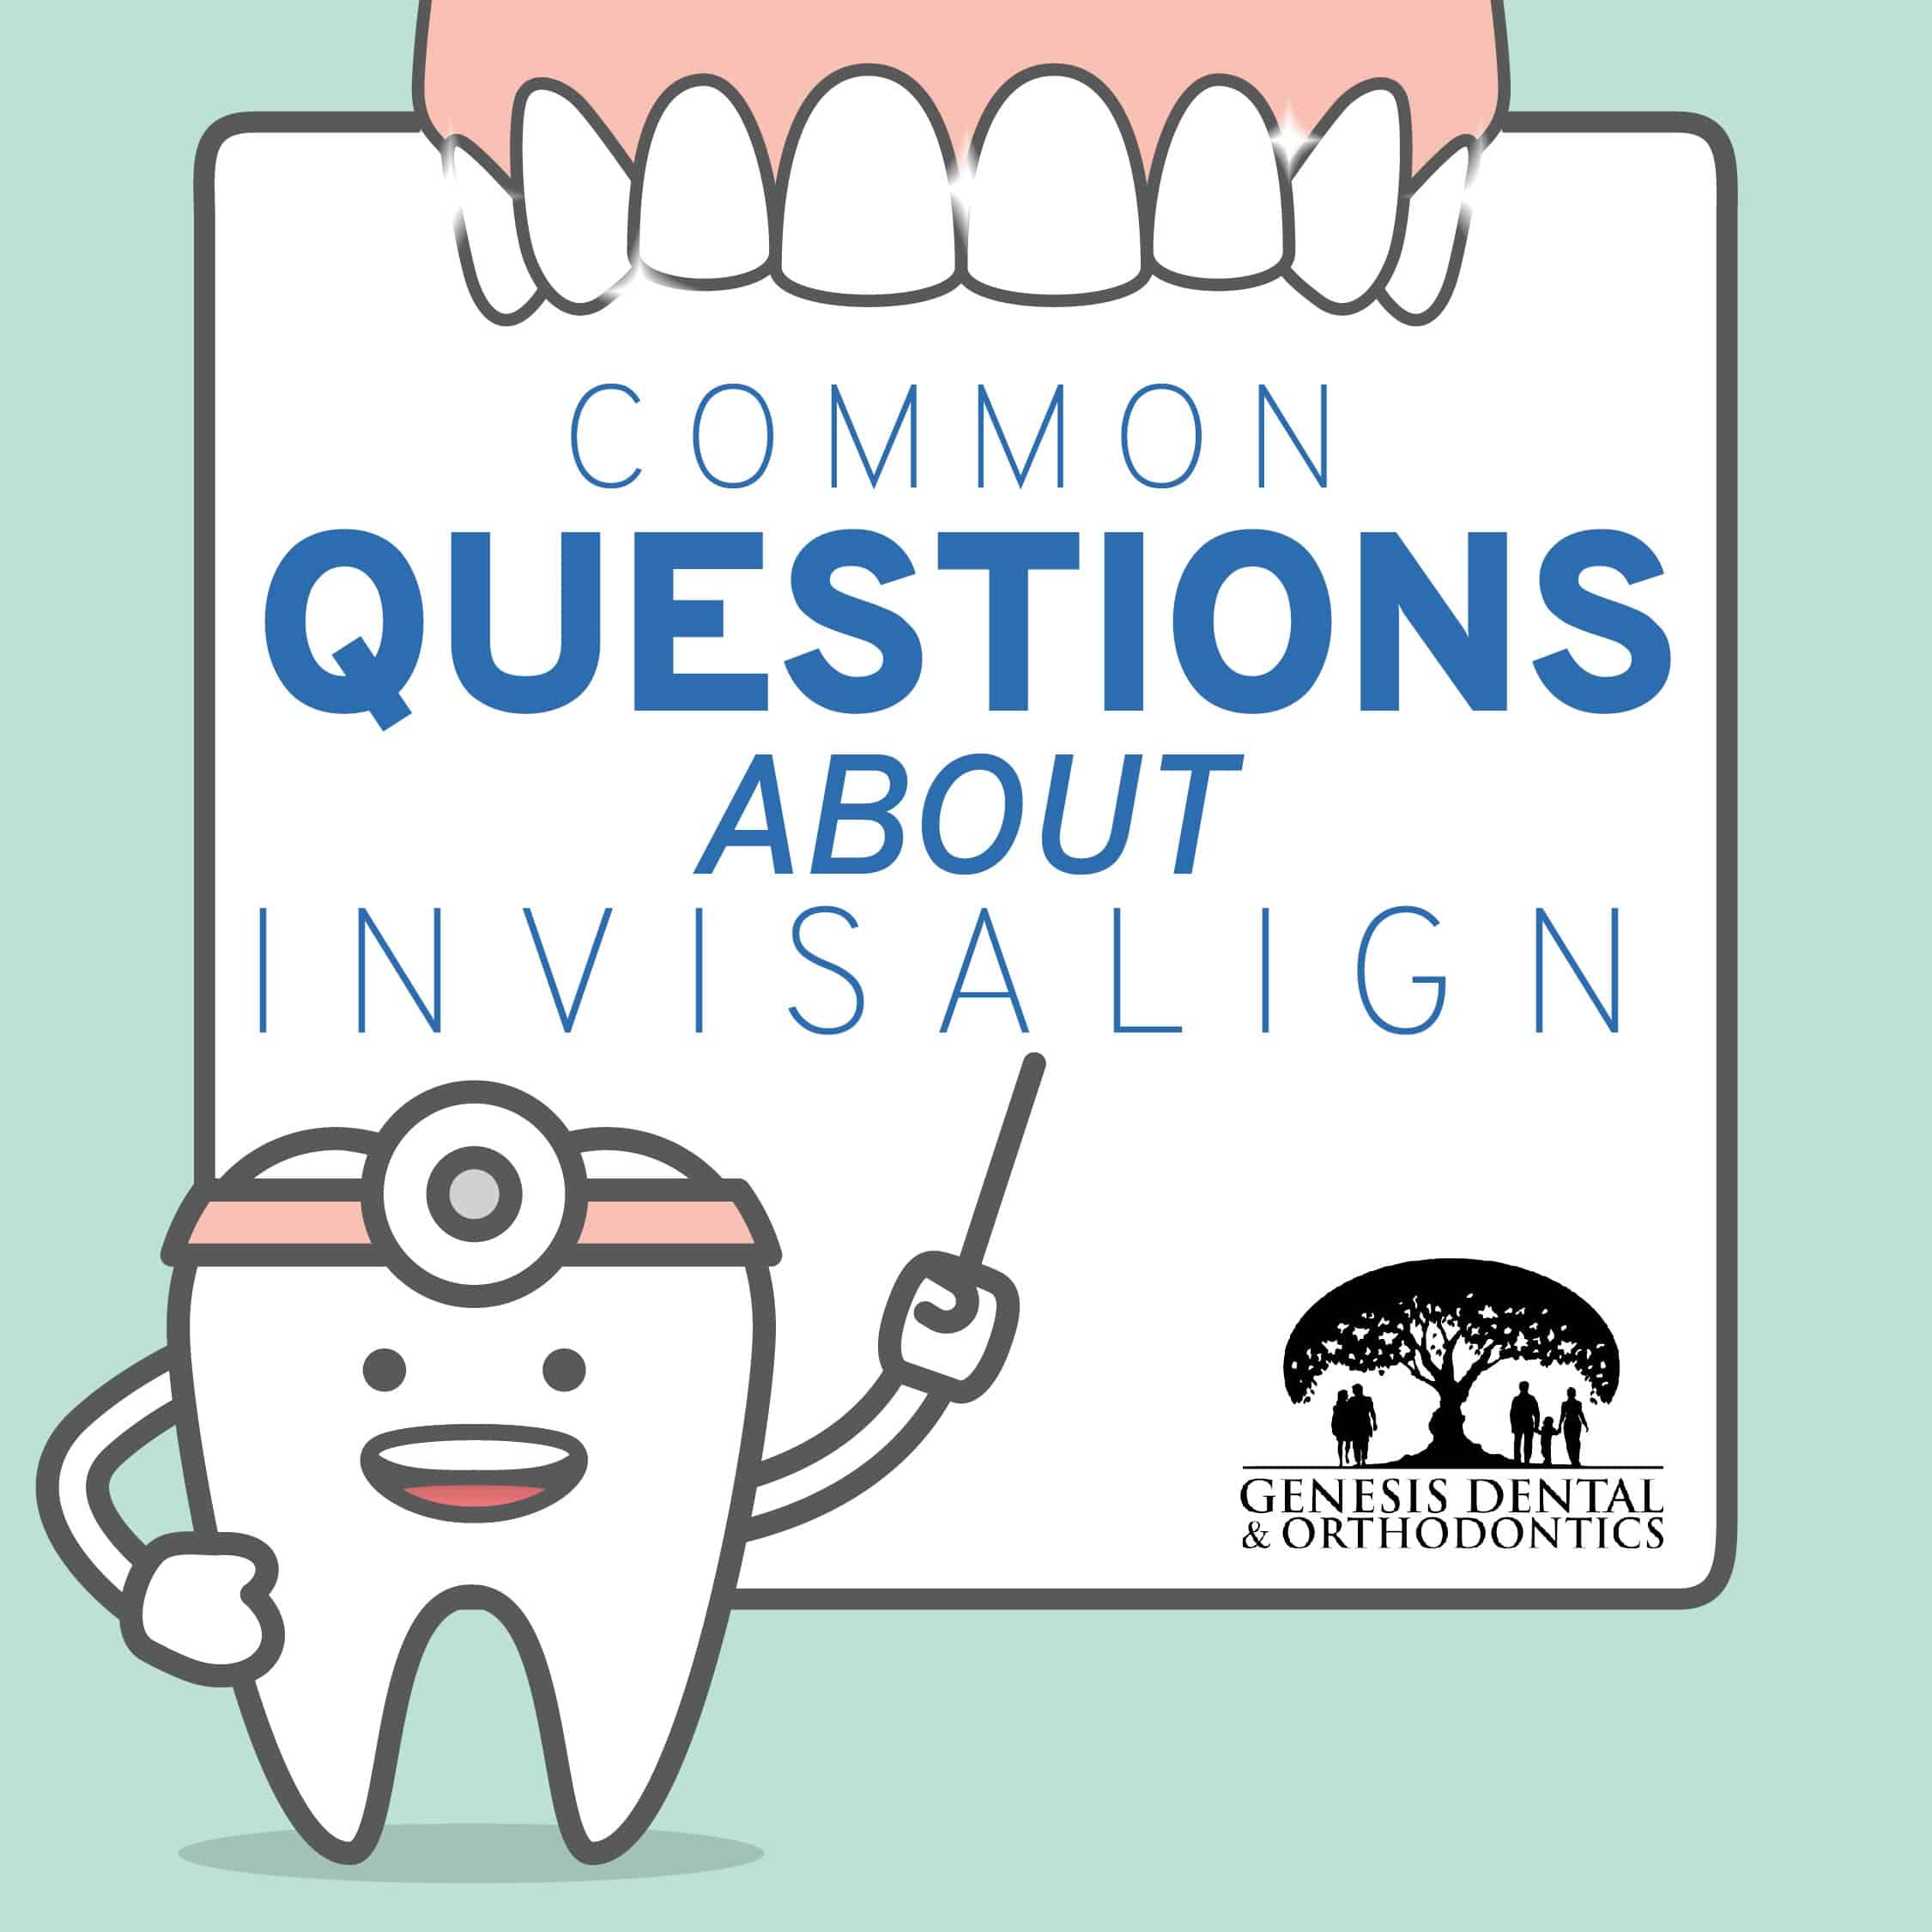 Invisible Braces: Fun Facts You Need to Know Today!